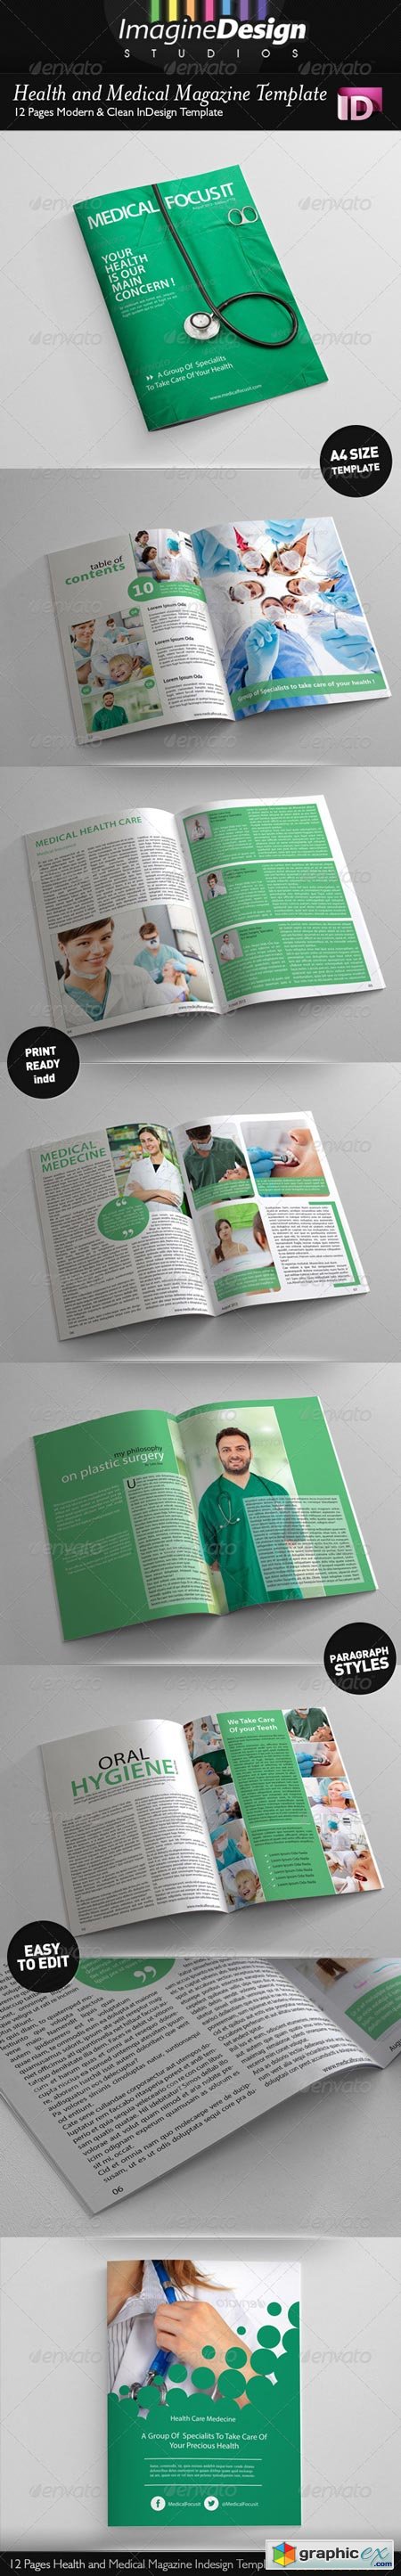 Health and Medical Magazine Template 5256597